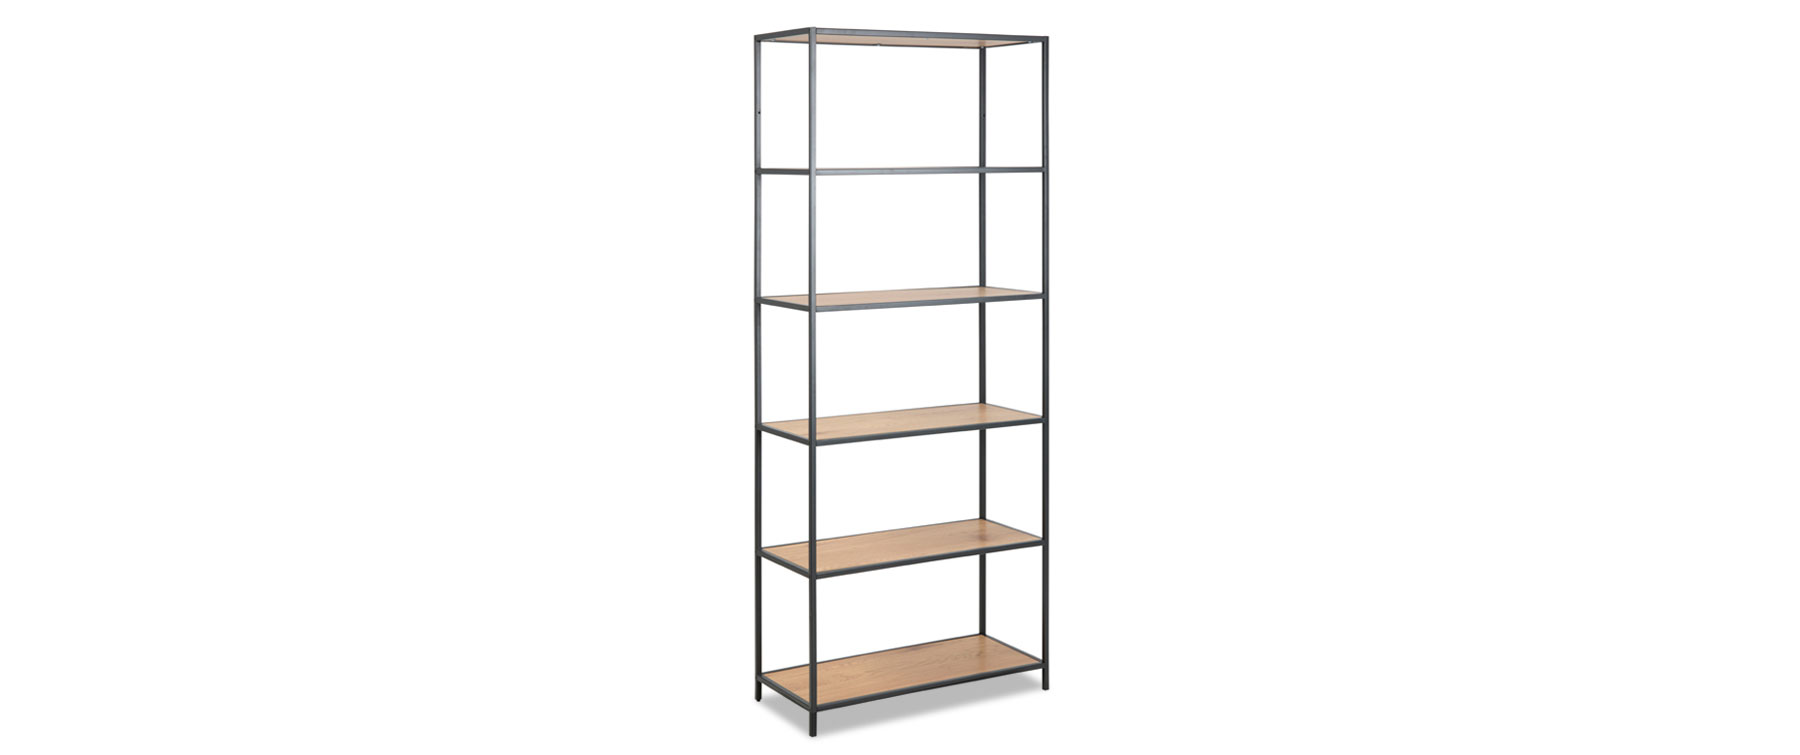 seaford_bookcase.jpg_product